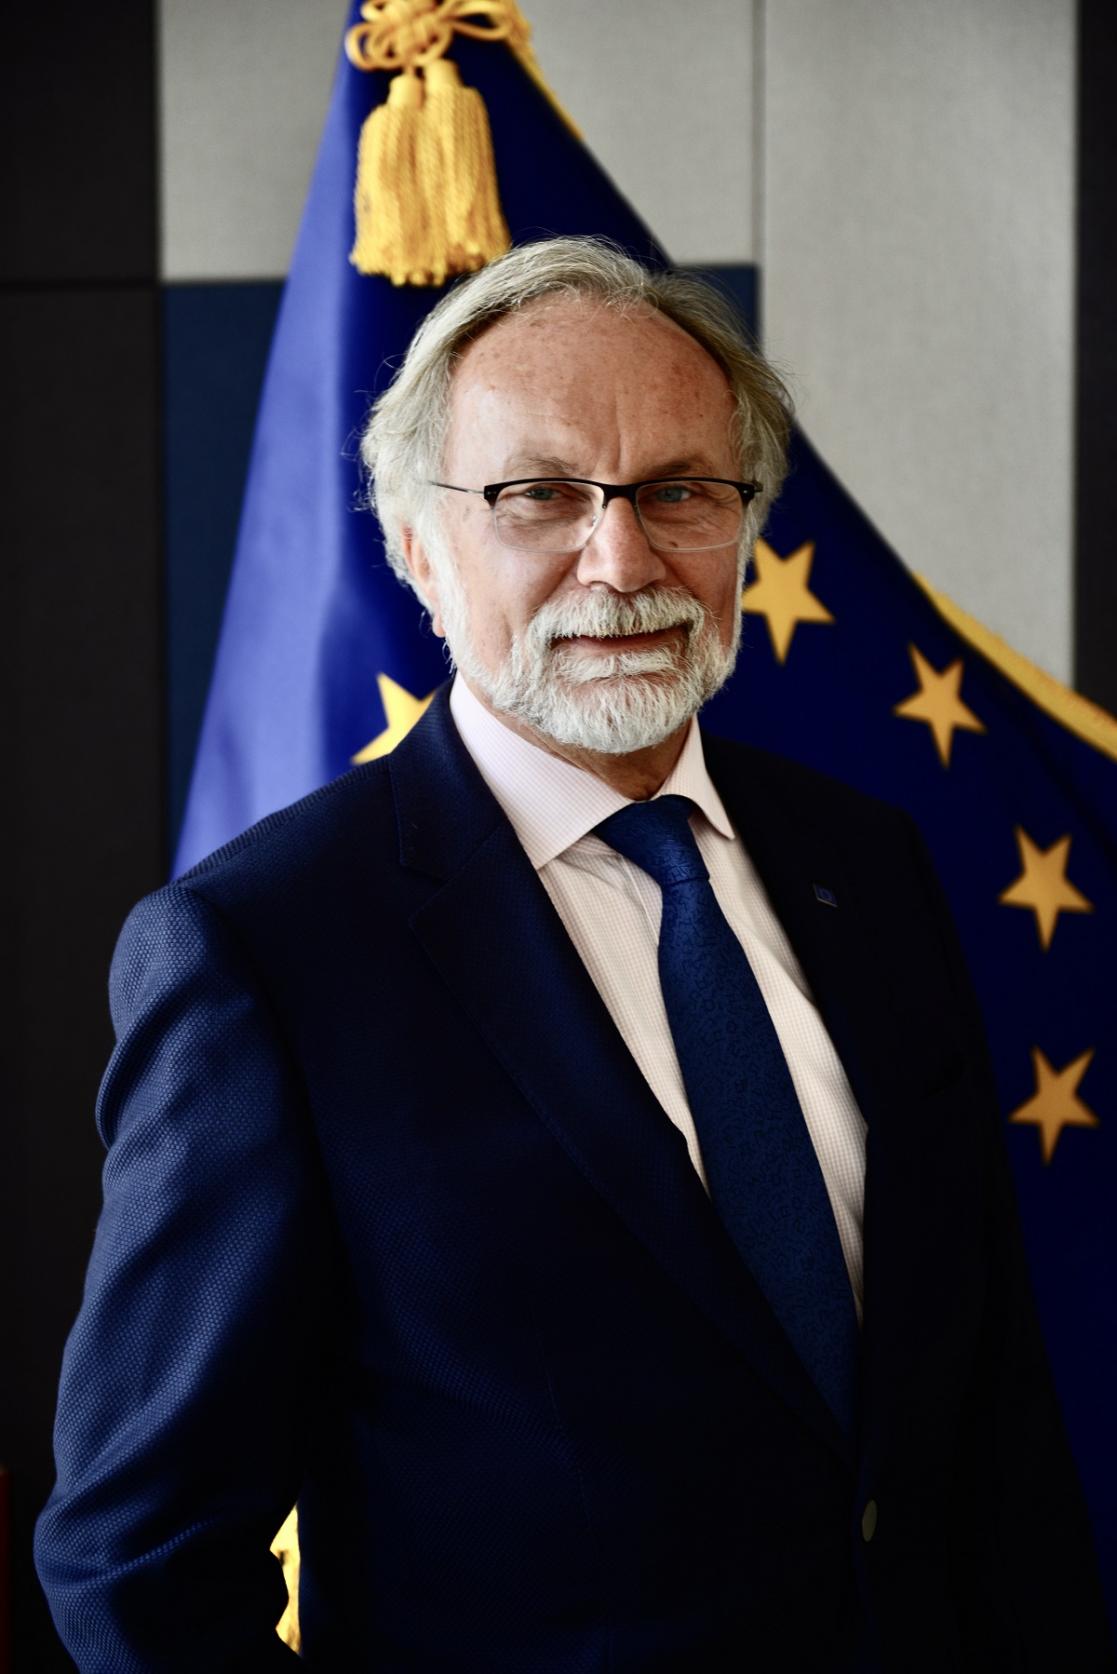 Man with an EU flag in the background